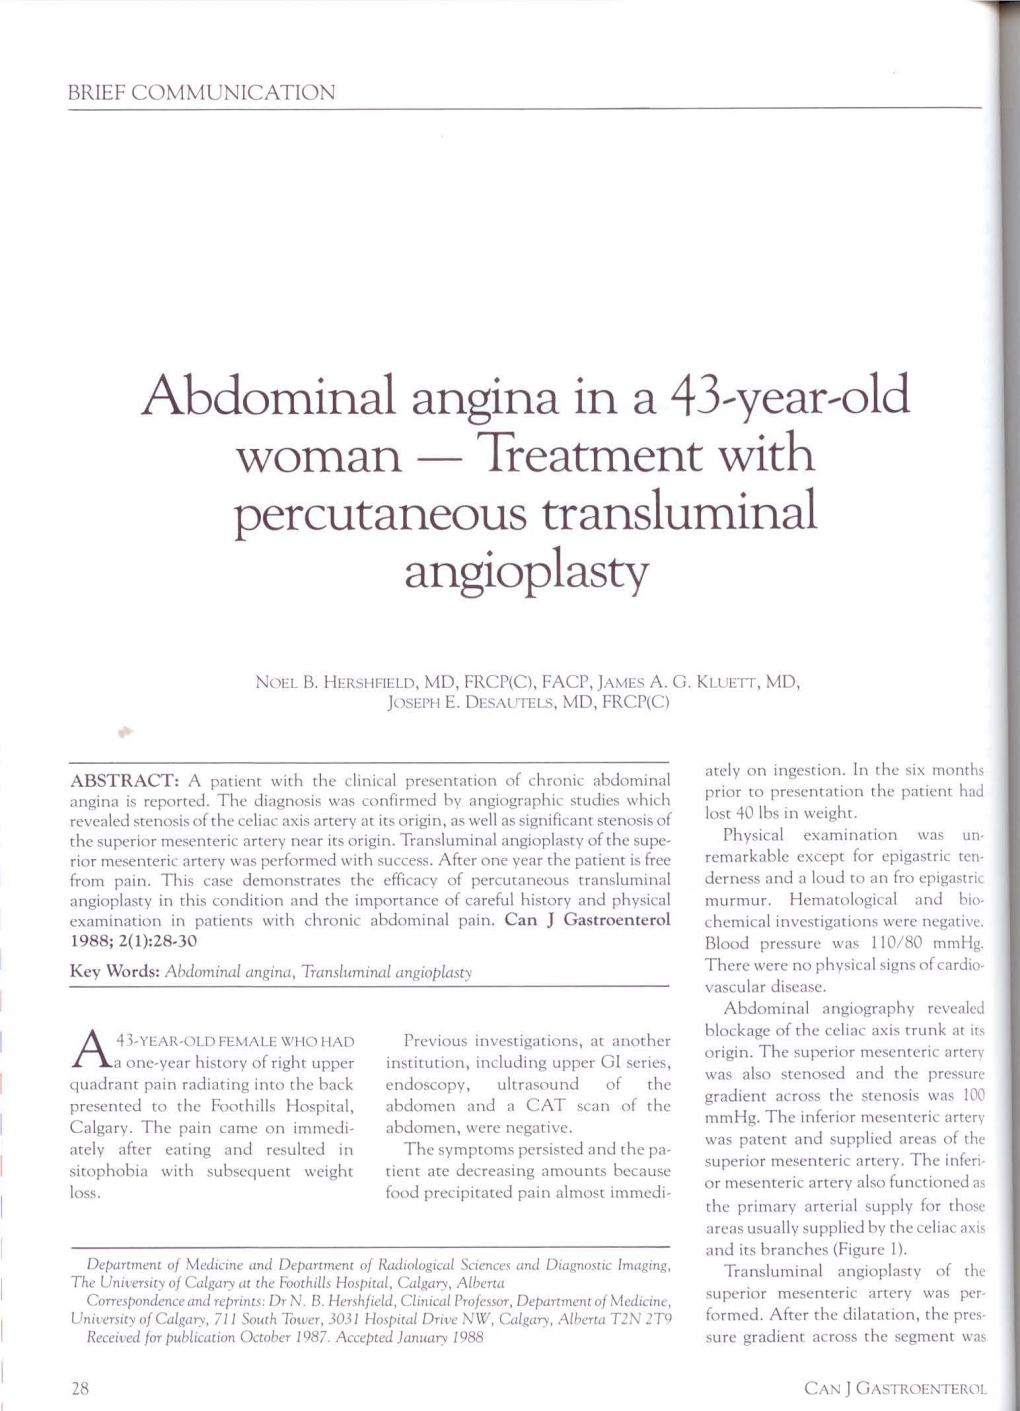 Abdotninal Angina in a 43,Year,Old Wotnan - Treattnent with Percutaneous Translurninal Angioplasty